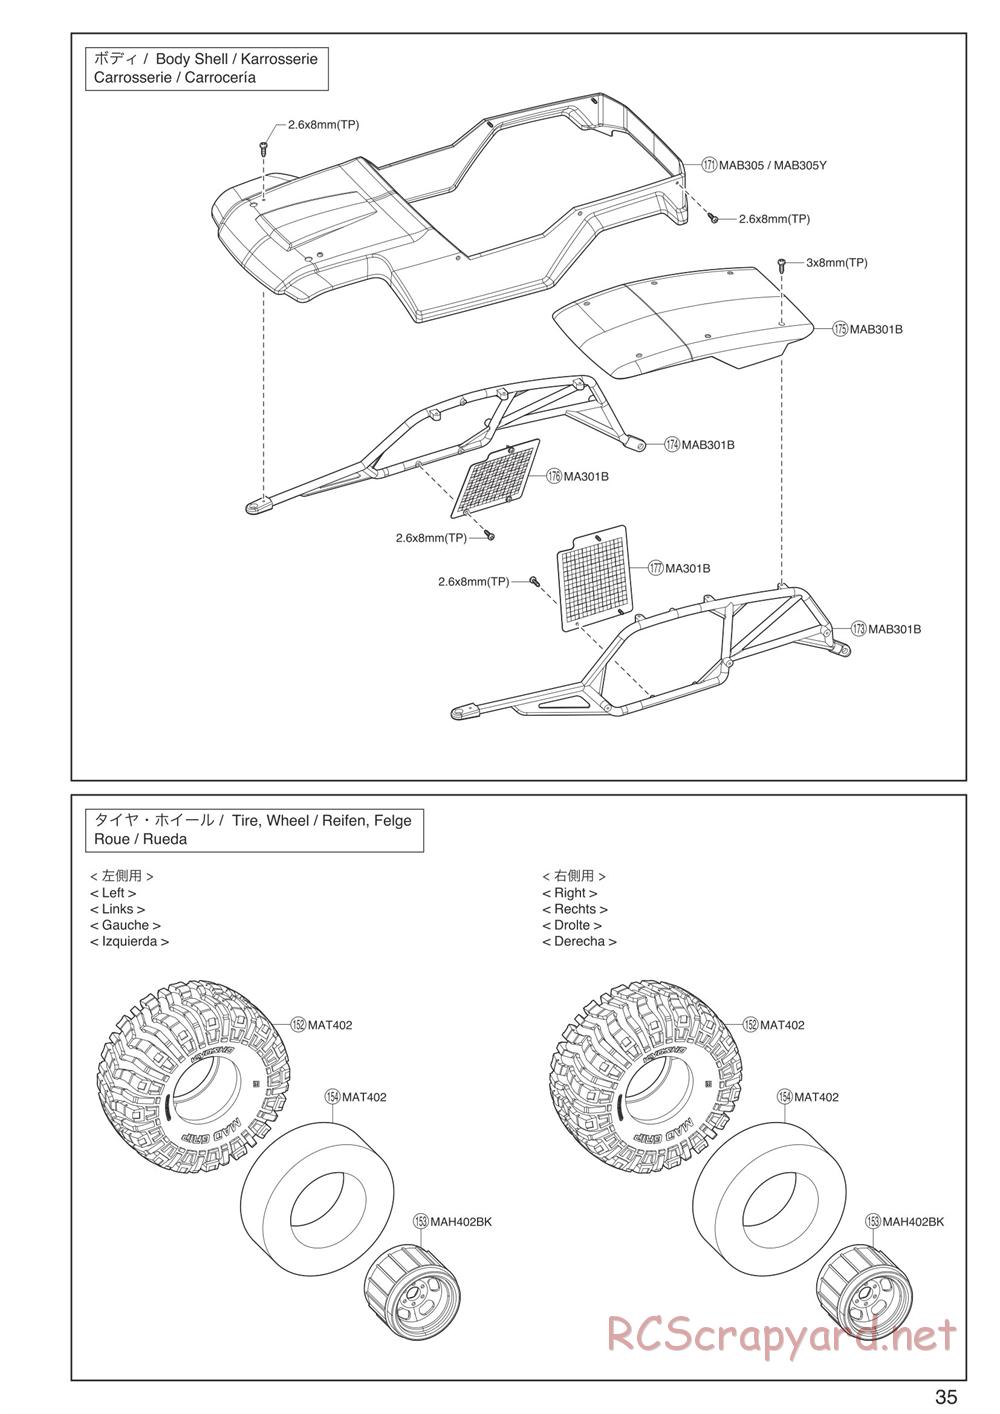 Kyosho - FO-XX VE 2.0 - Exploded Views - Page 3